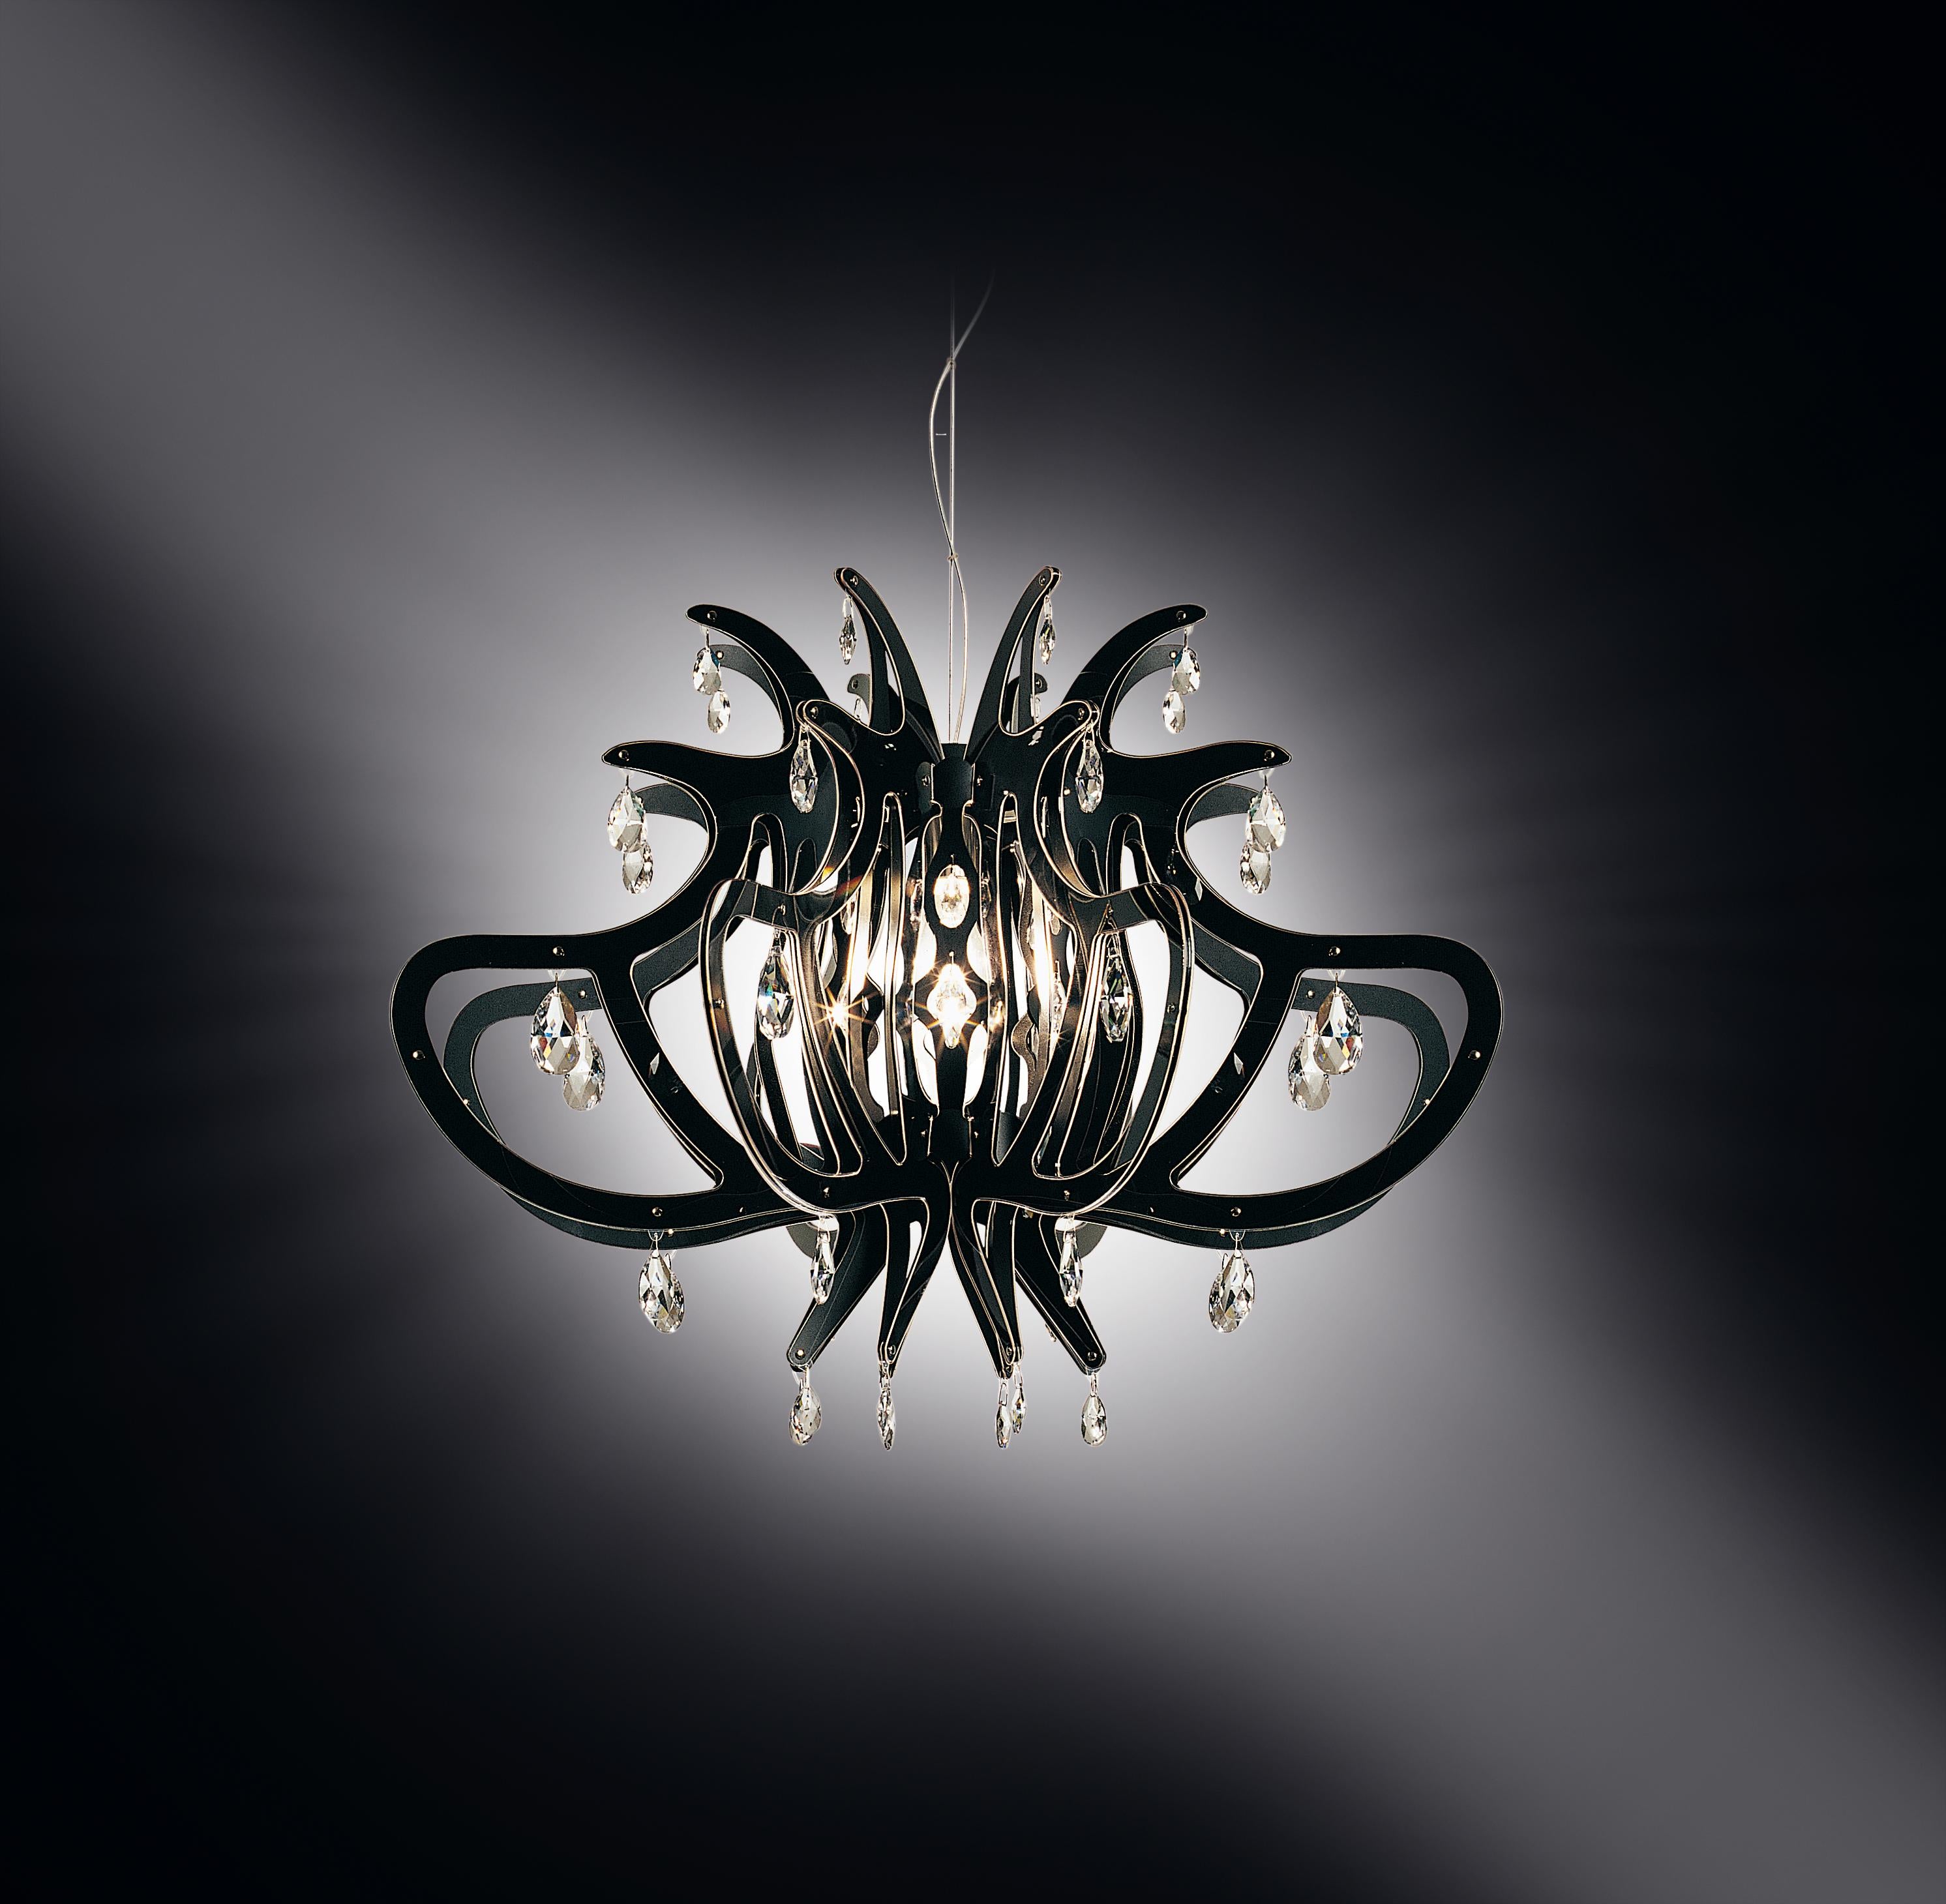 Medusa is a dramatic collection that marked Slamp’s evolution of stylistic production just after the turn of the century. The radial structure easily connects to the central Cristalflex cylinder, that reflects the added luxury of transparent